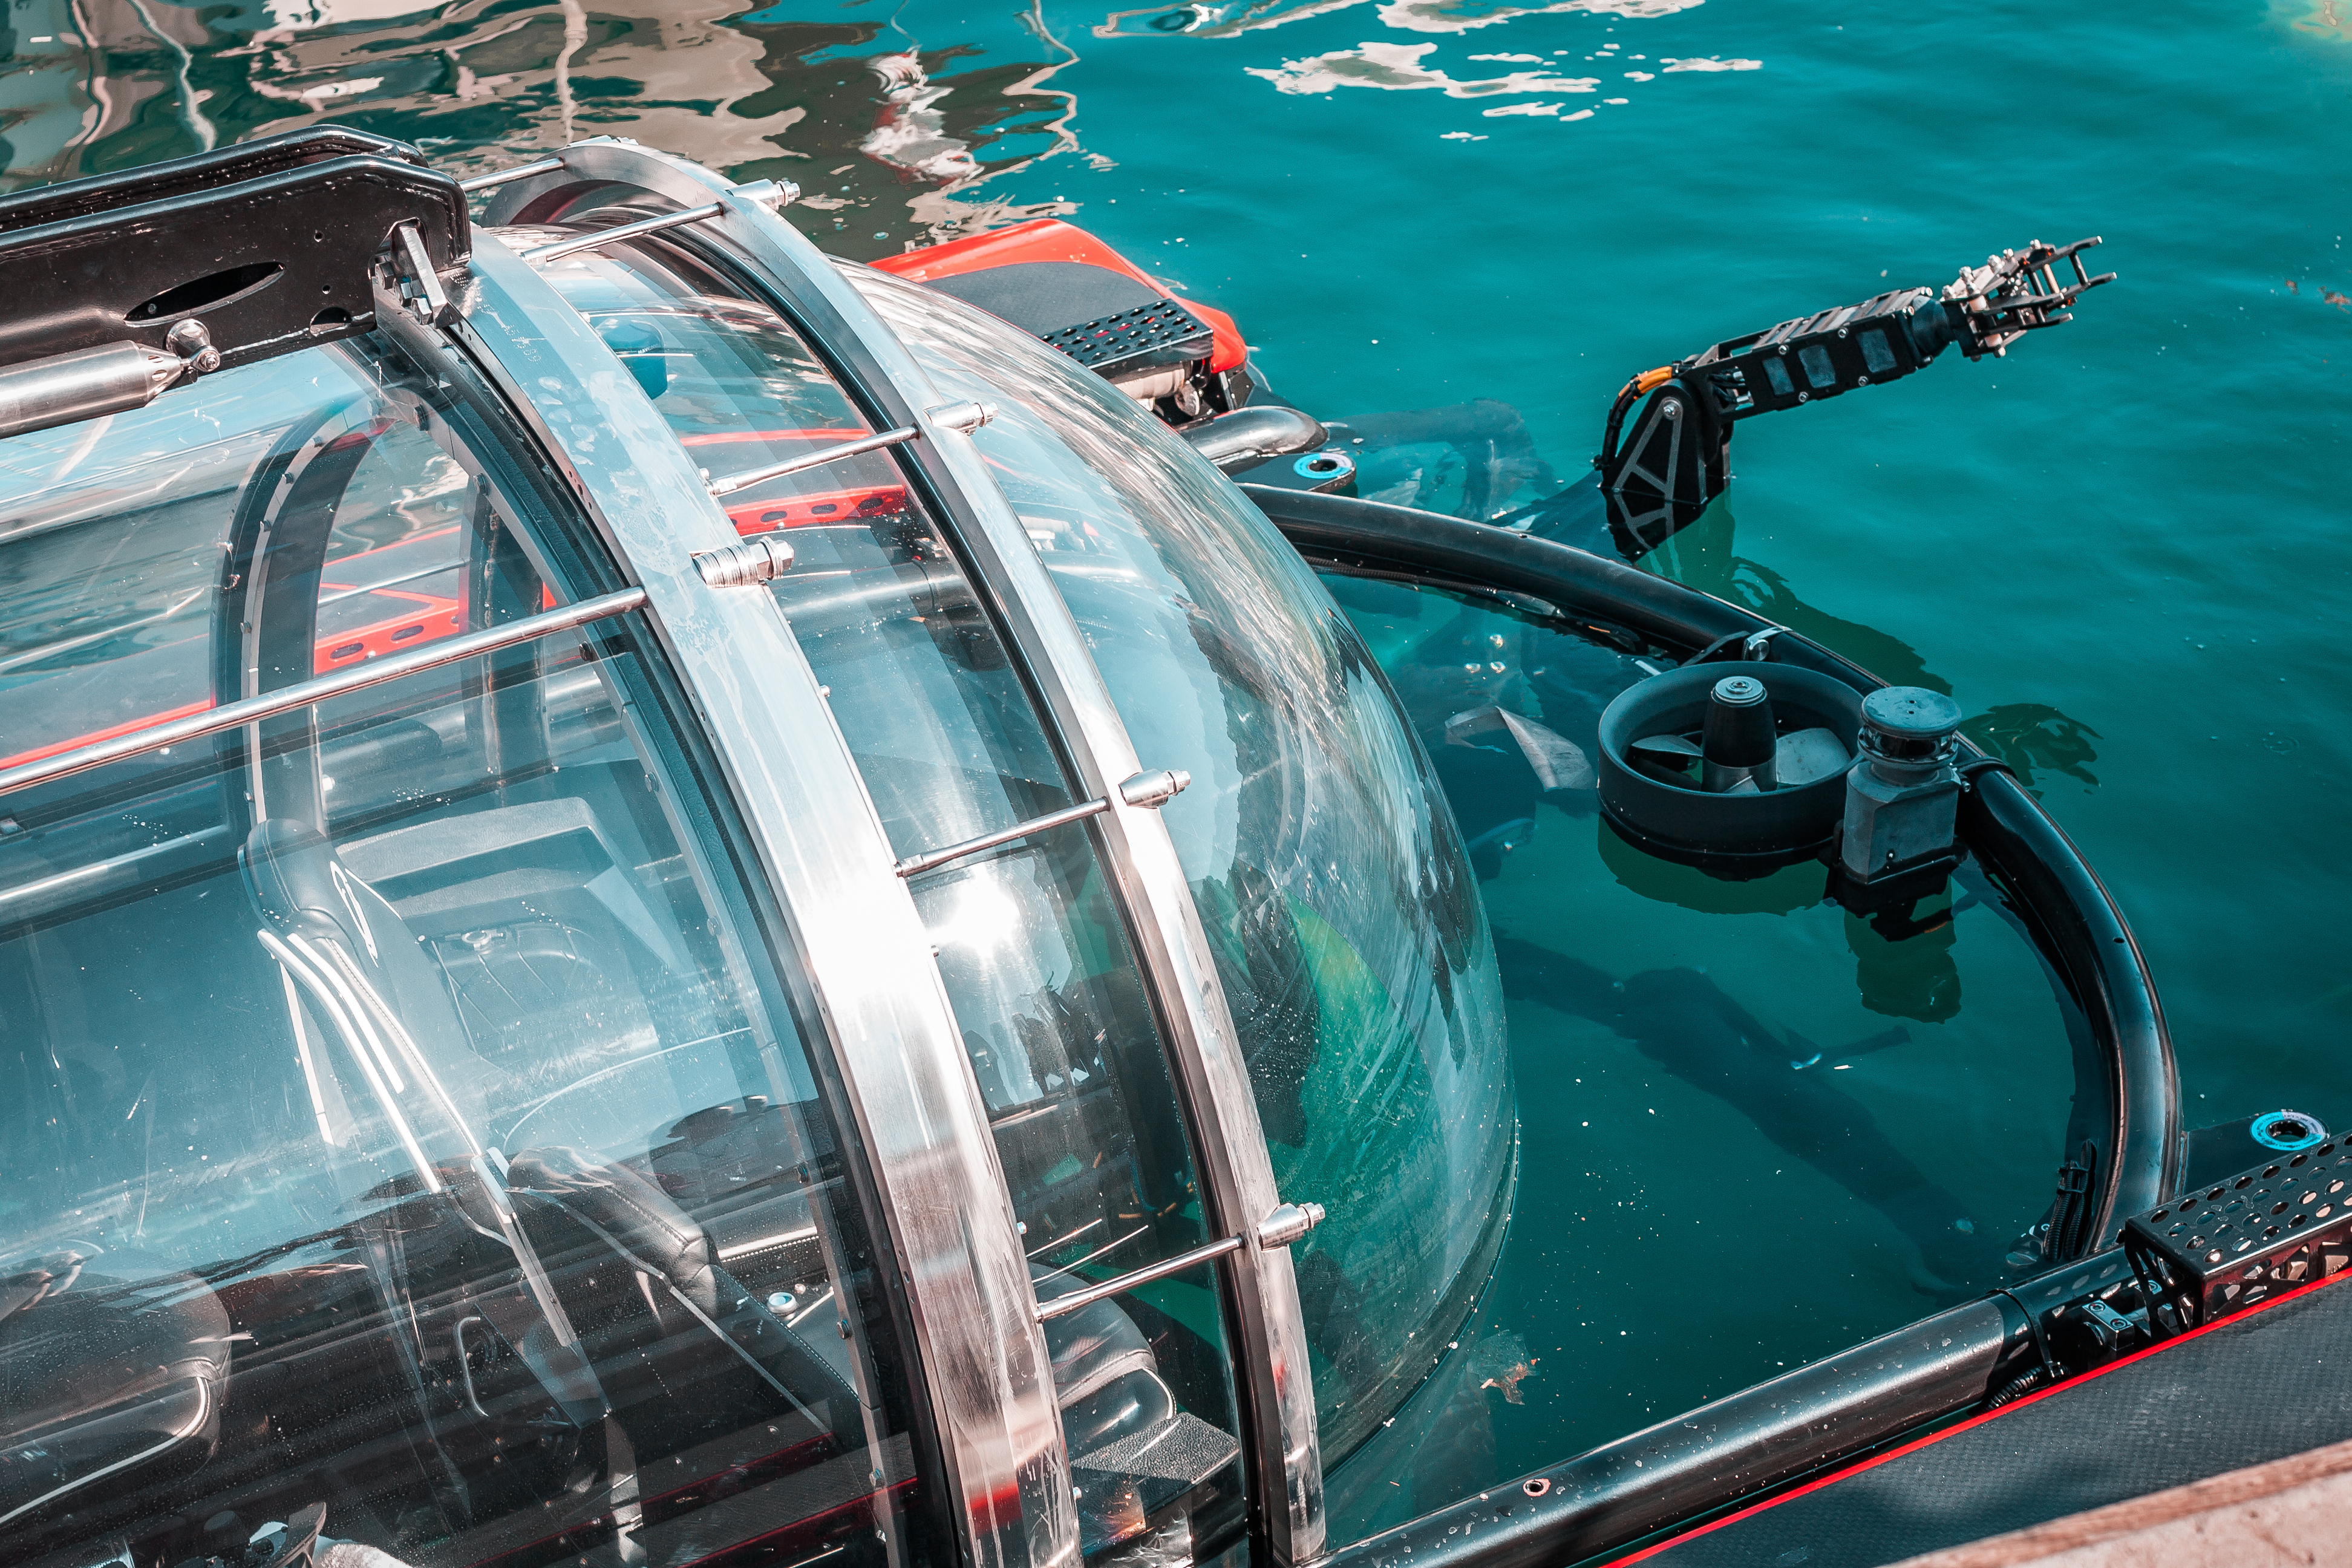 Commercial Submersible Vehicle